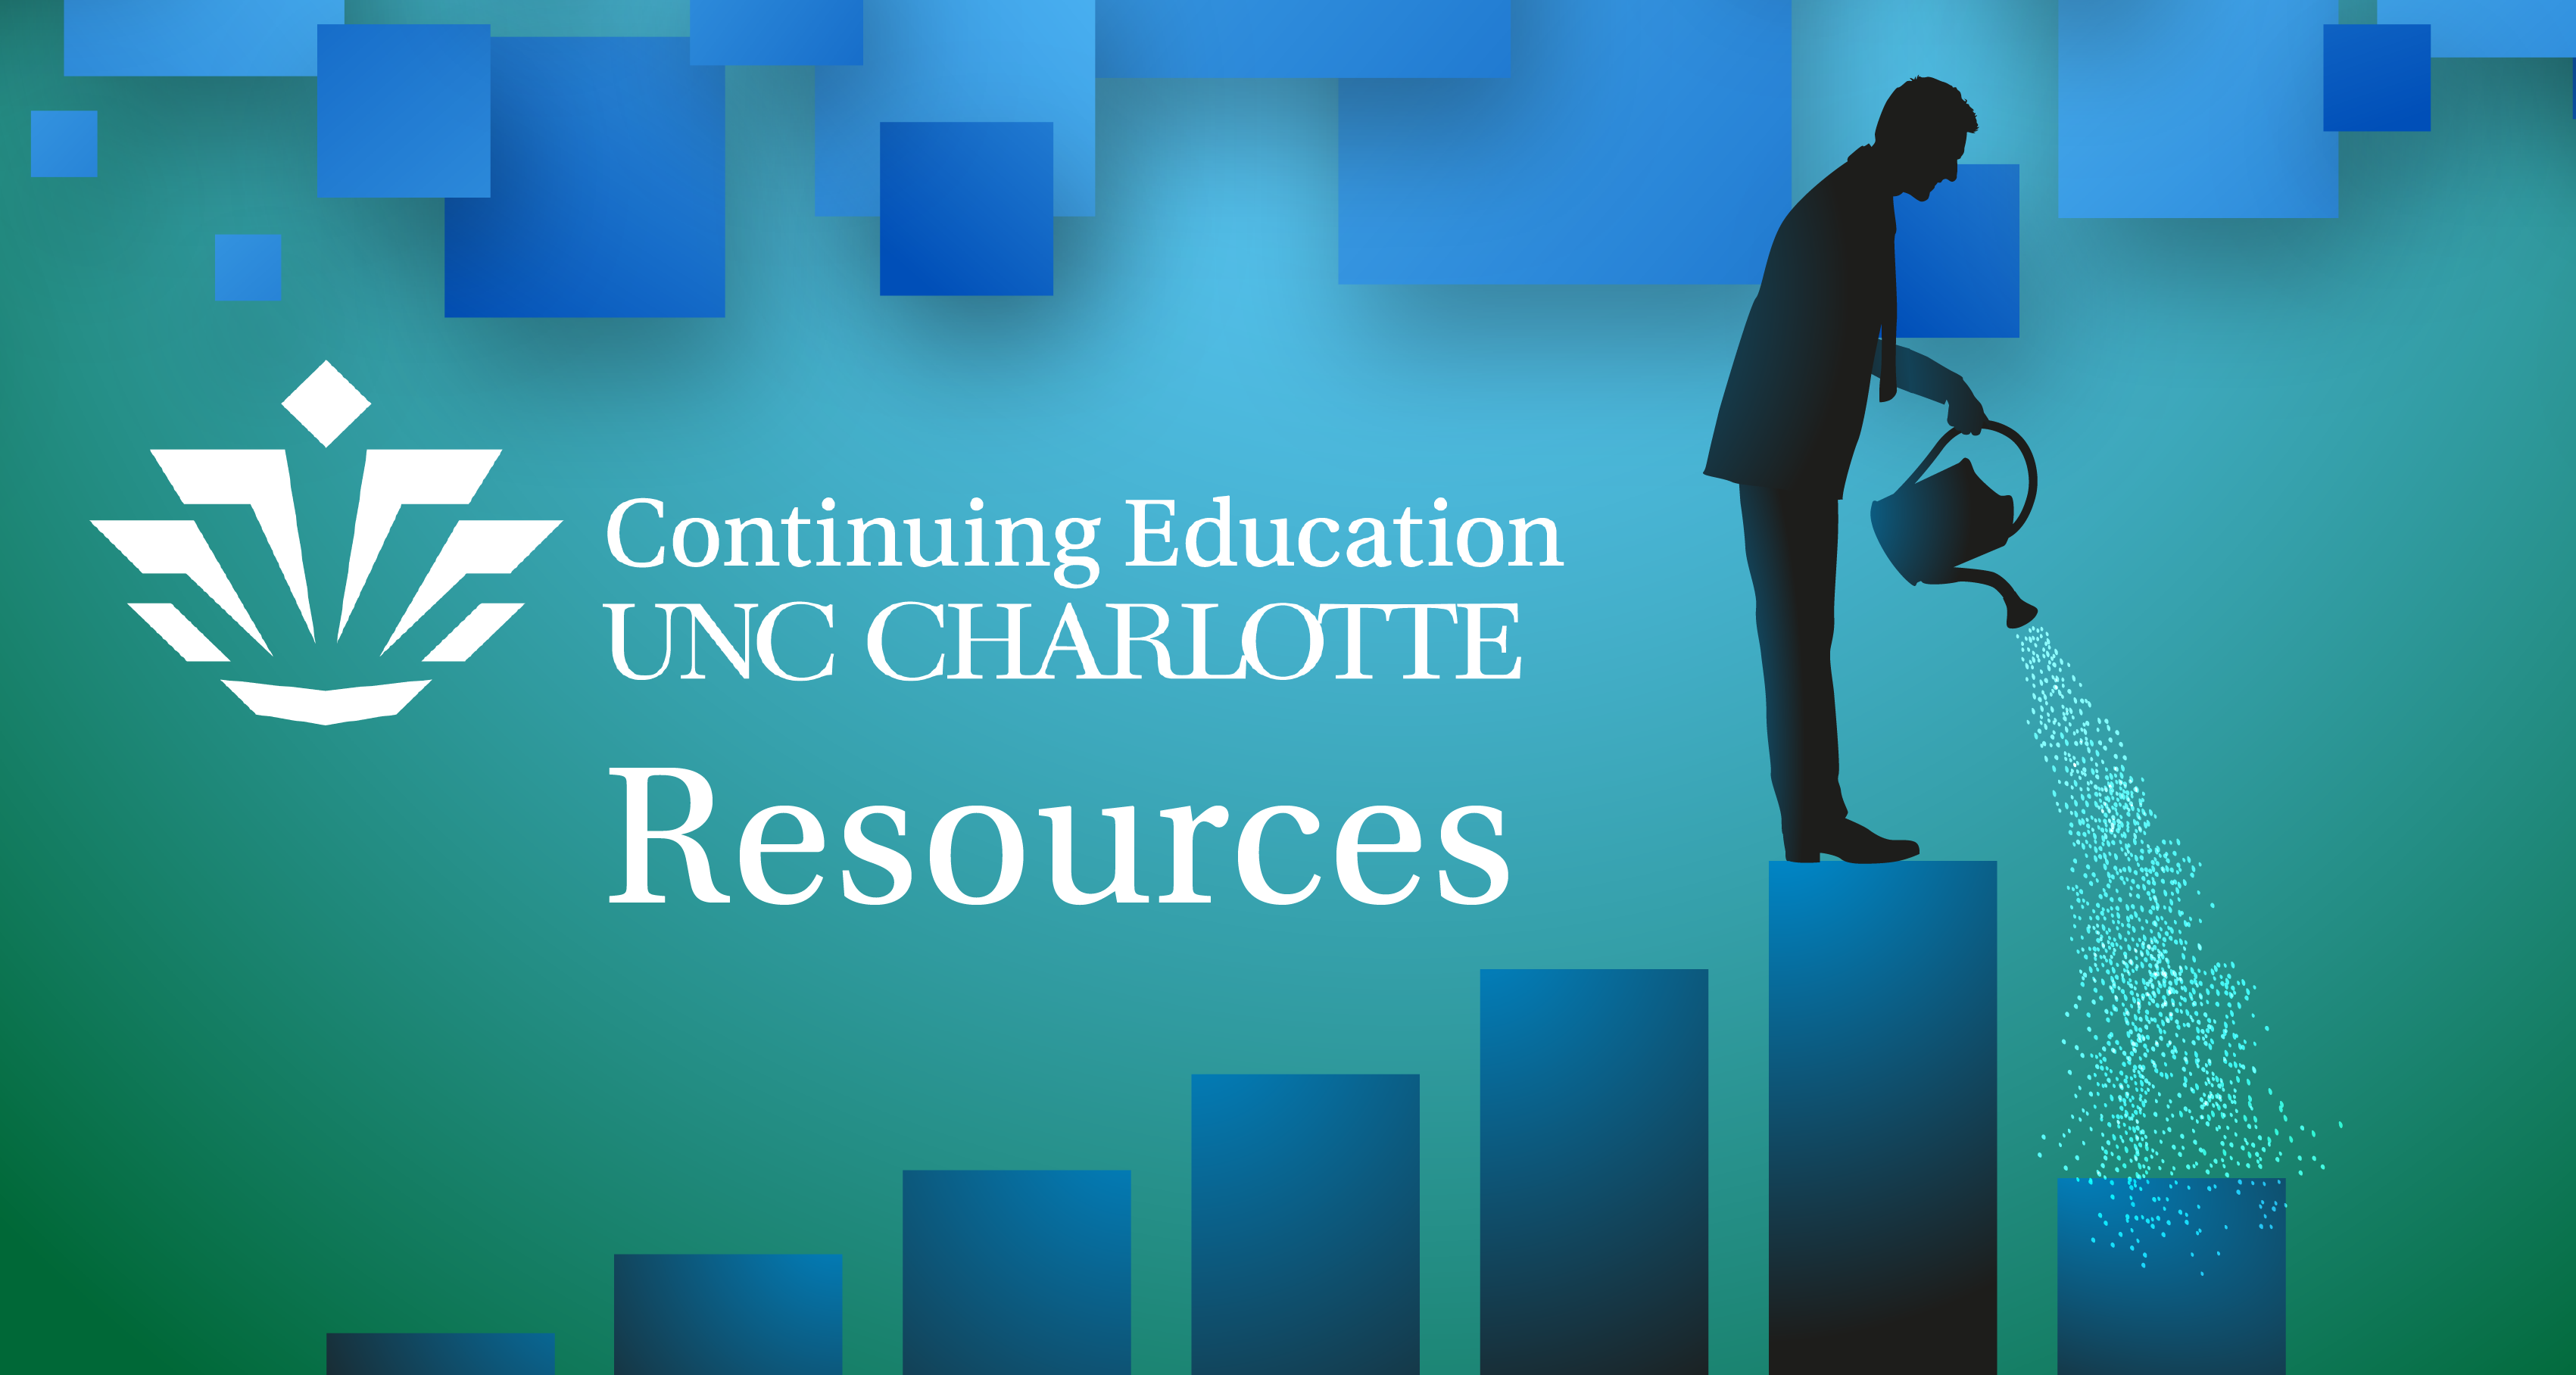 UNC Charlotte Continuing Education Resources